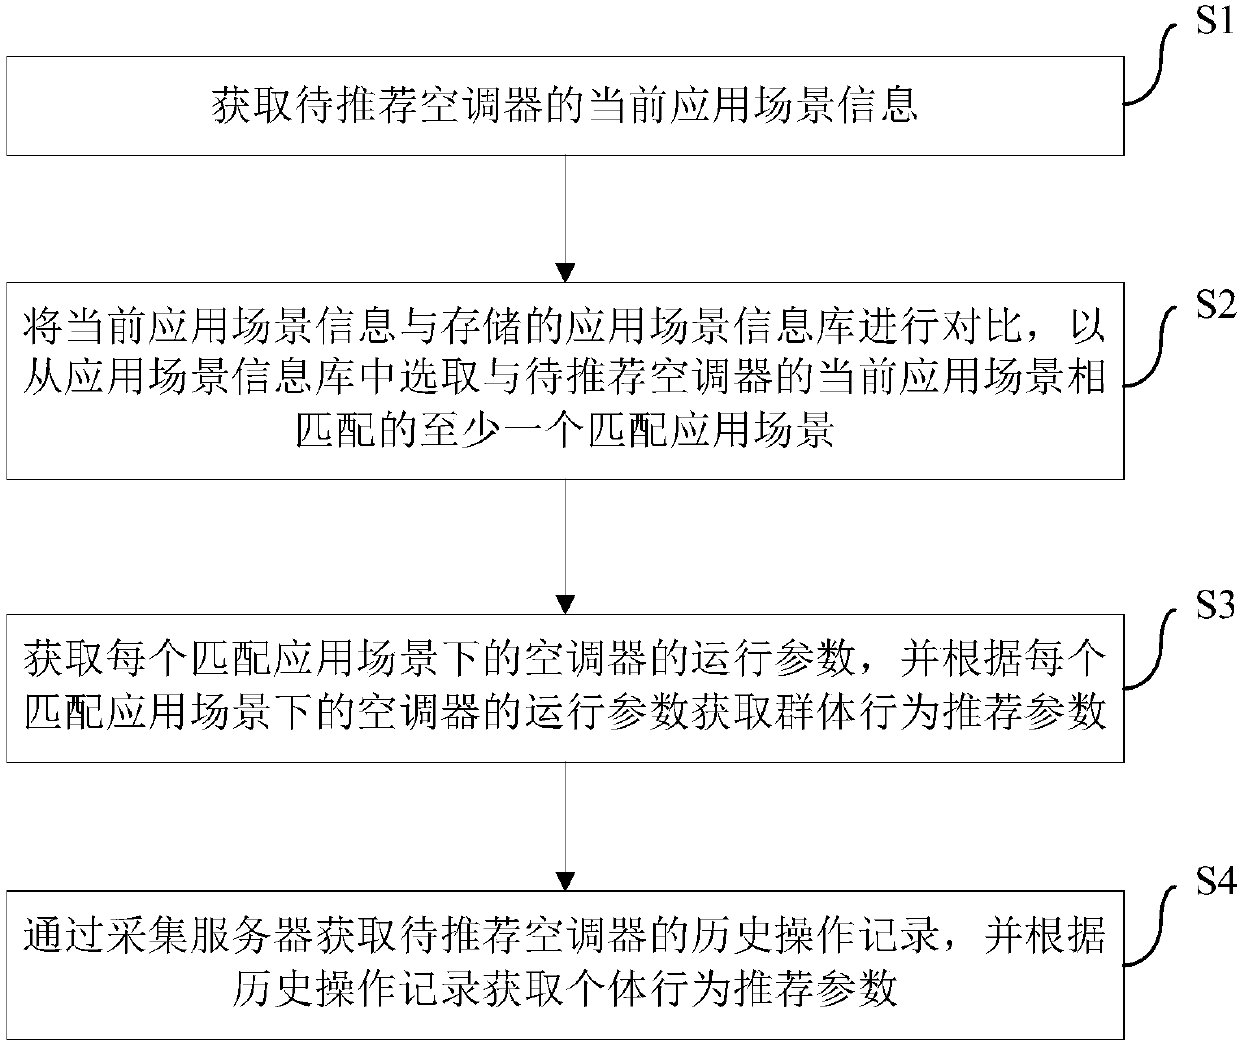 Air conditioner as well as recommendation method and system for operation parameters of air conditioner, and big data server